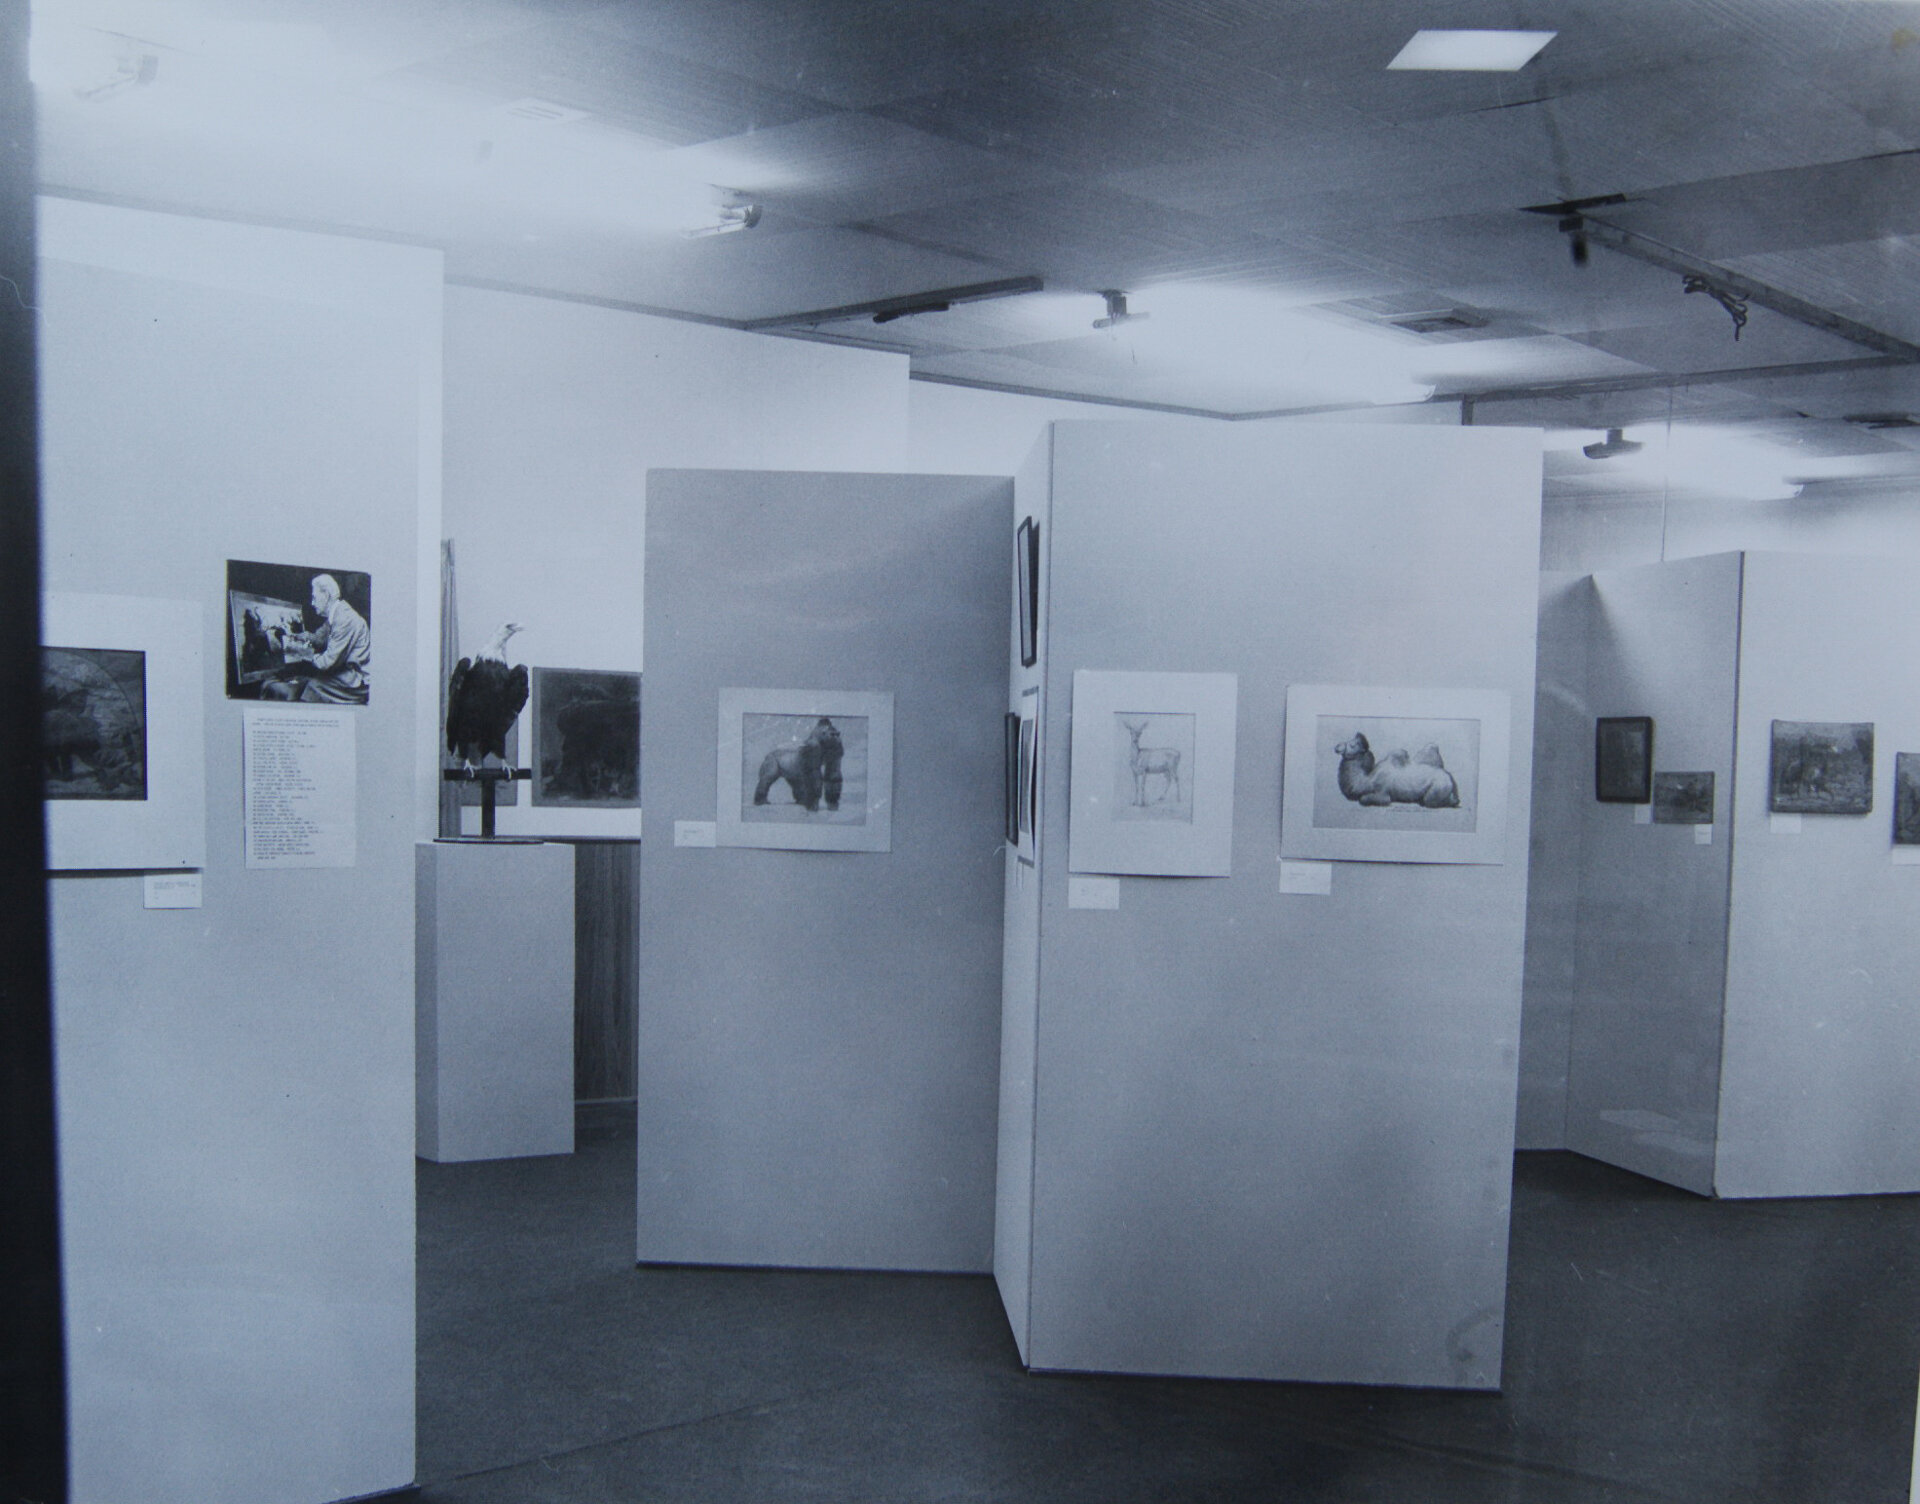  Take a look inside our galleries in the year 1970!  